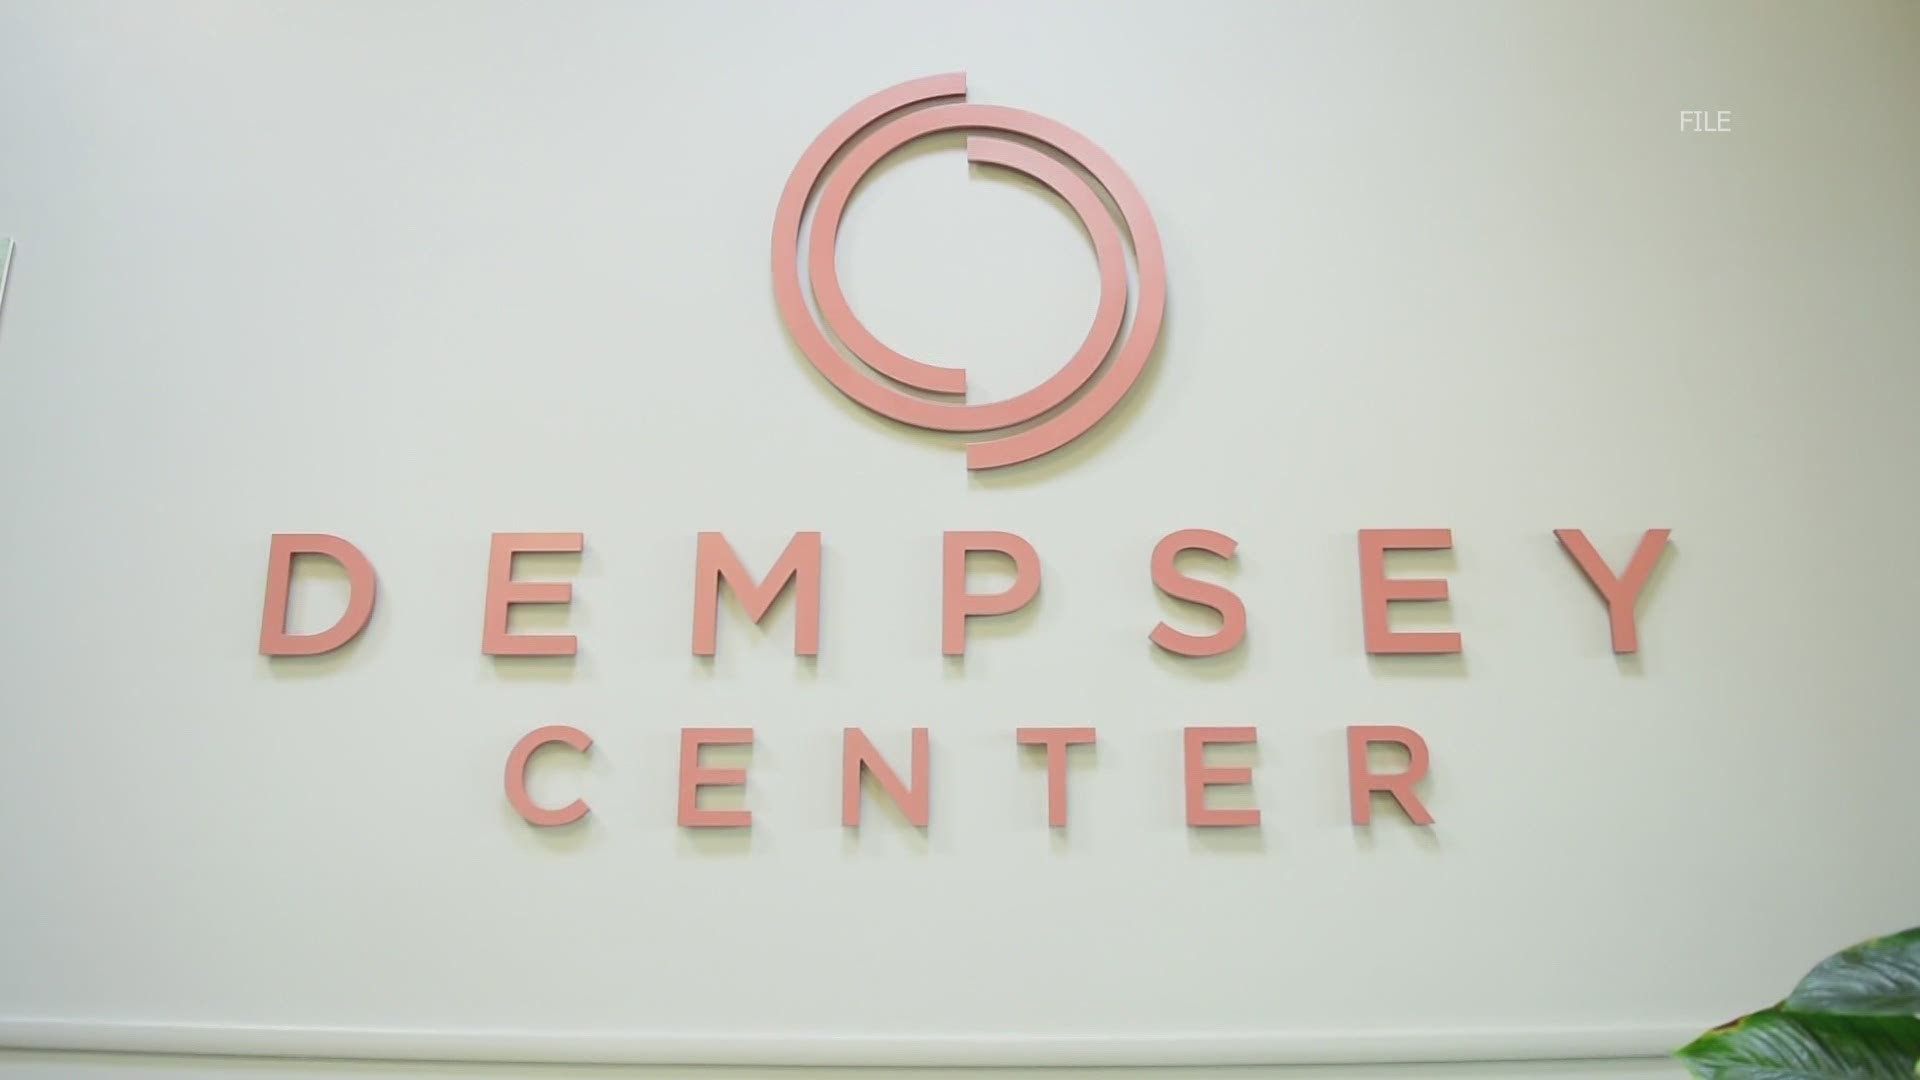 Dempsey Center announces budget cuts and layoffs